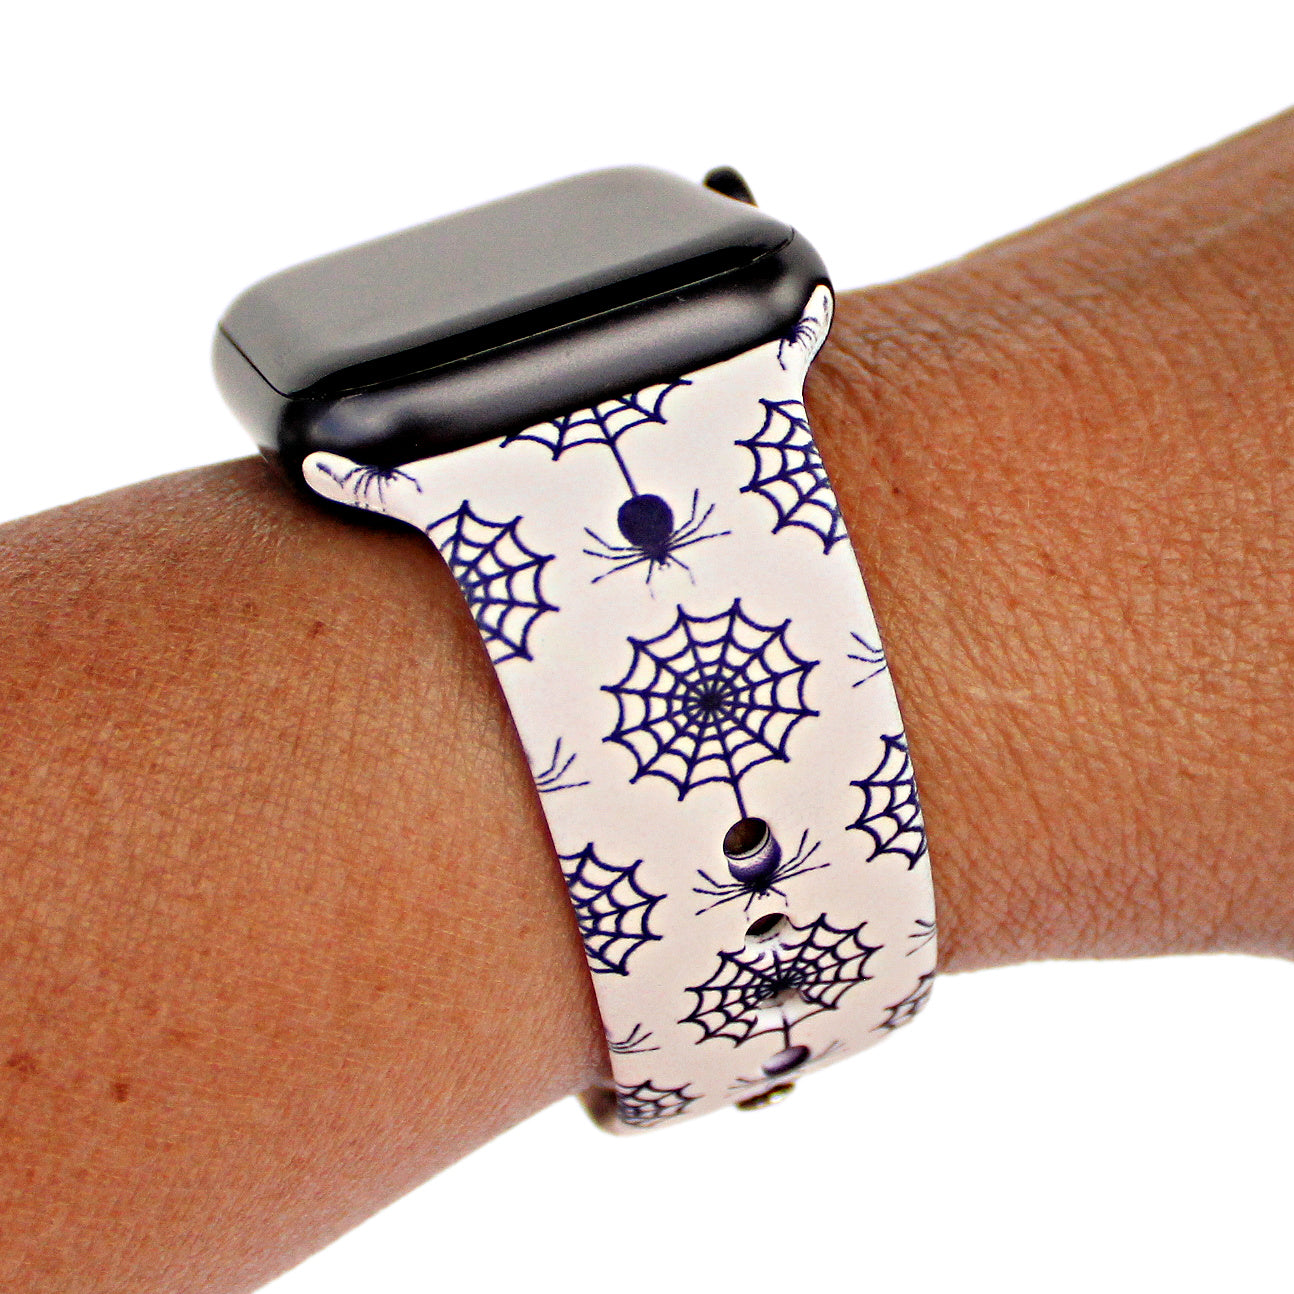 Salty USA Halloween Printed Silicone Apple Watch Bands